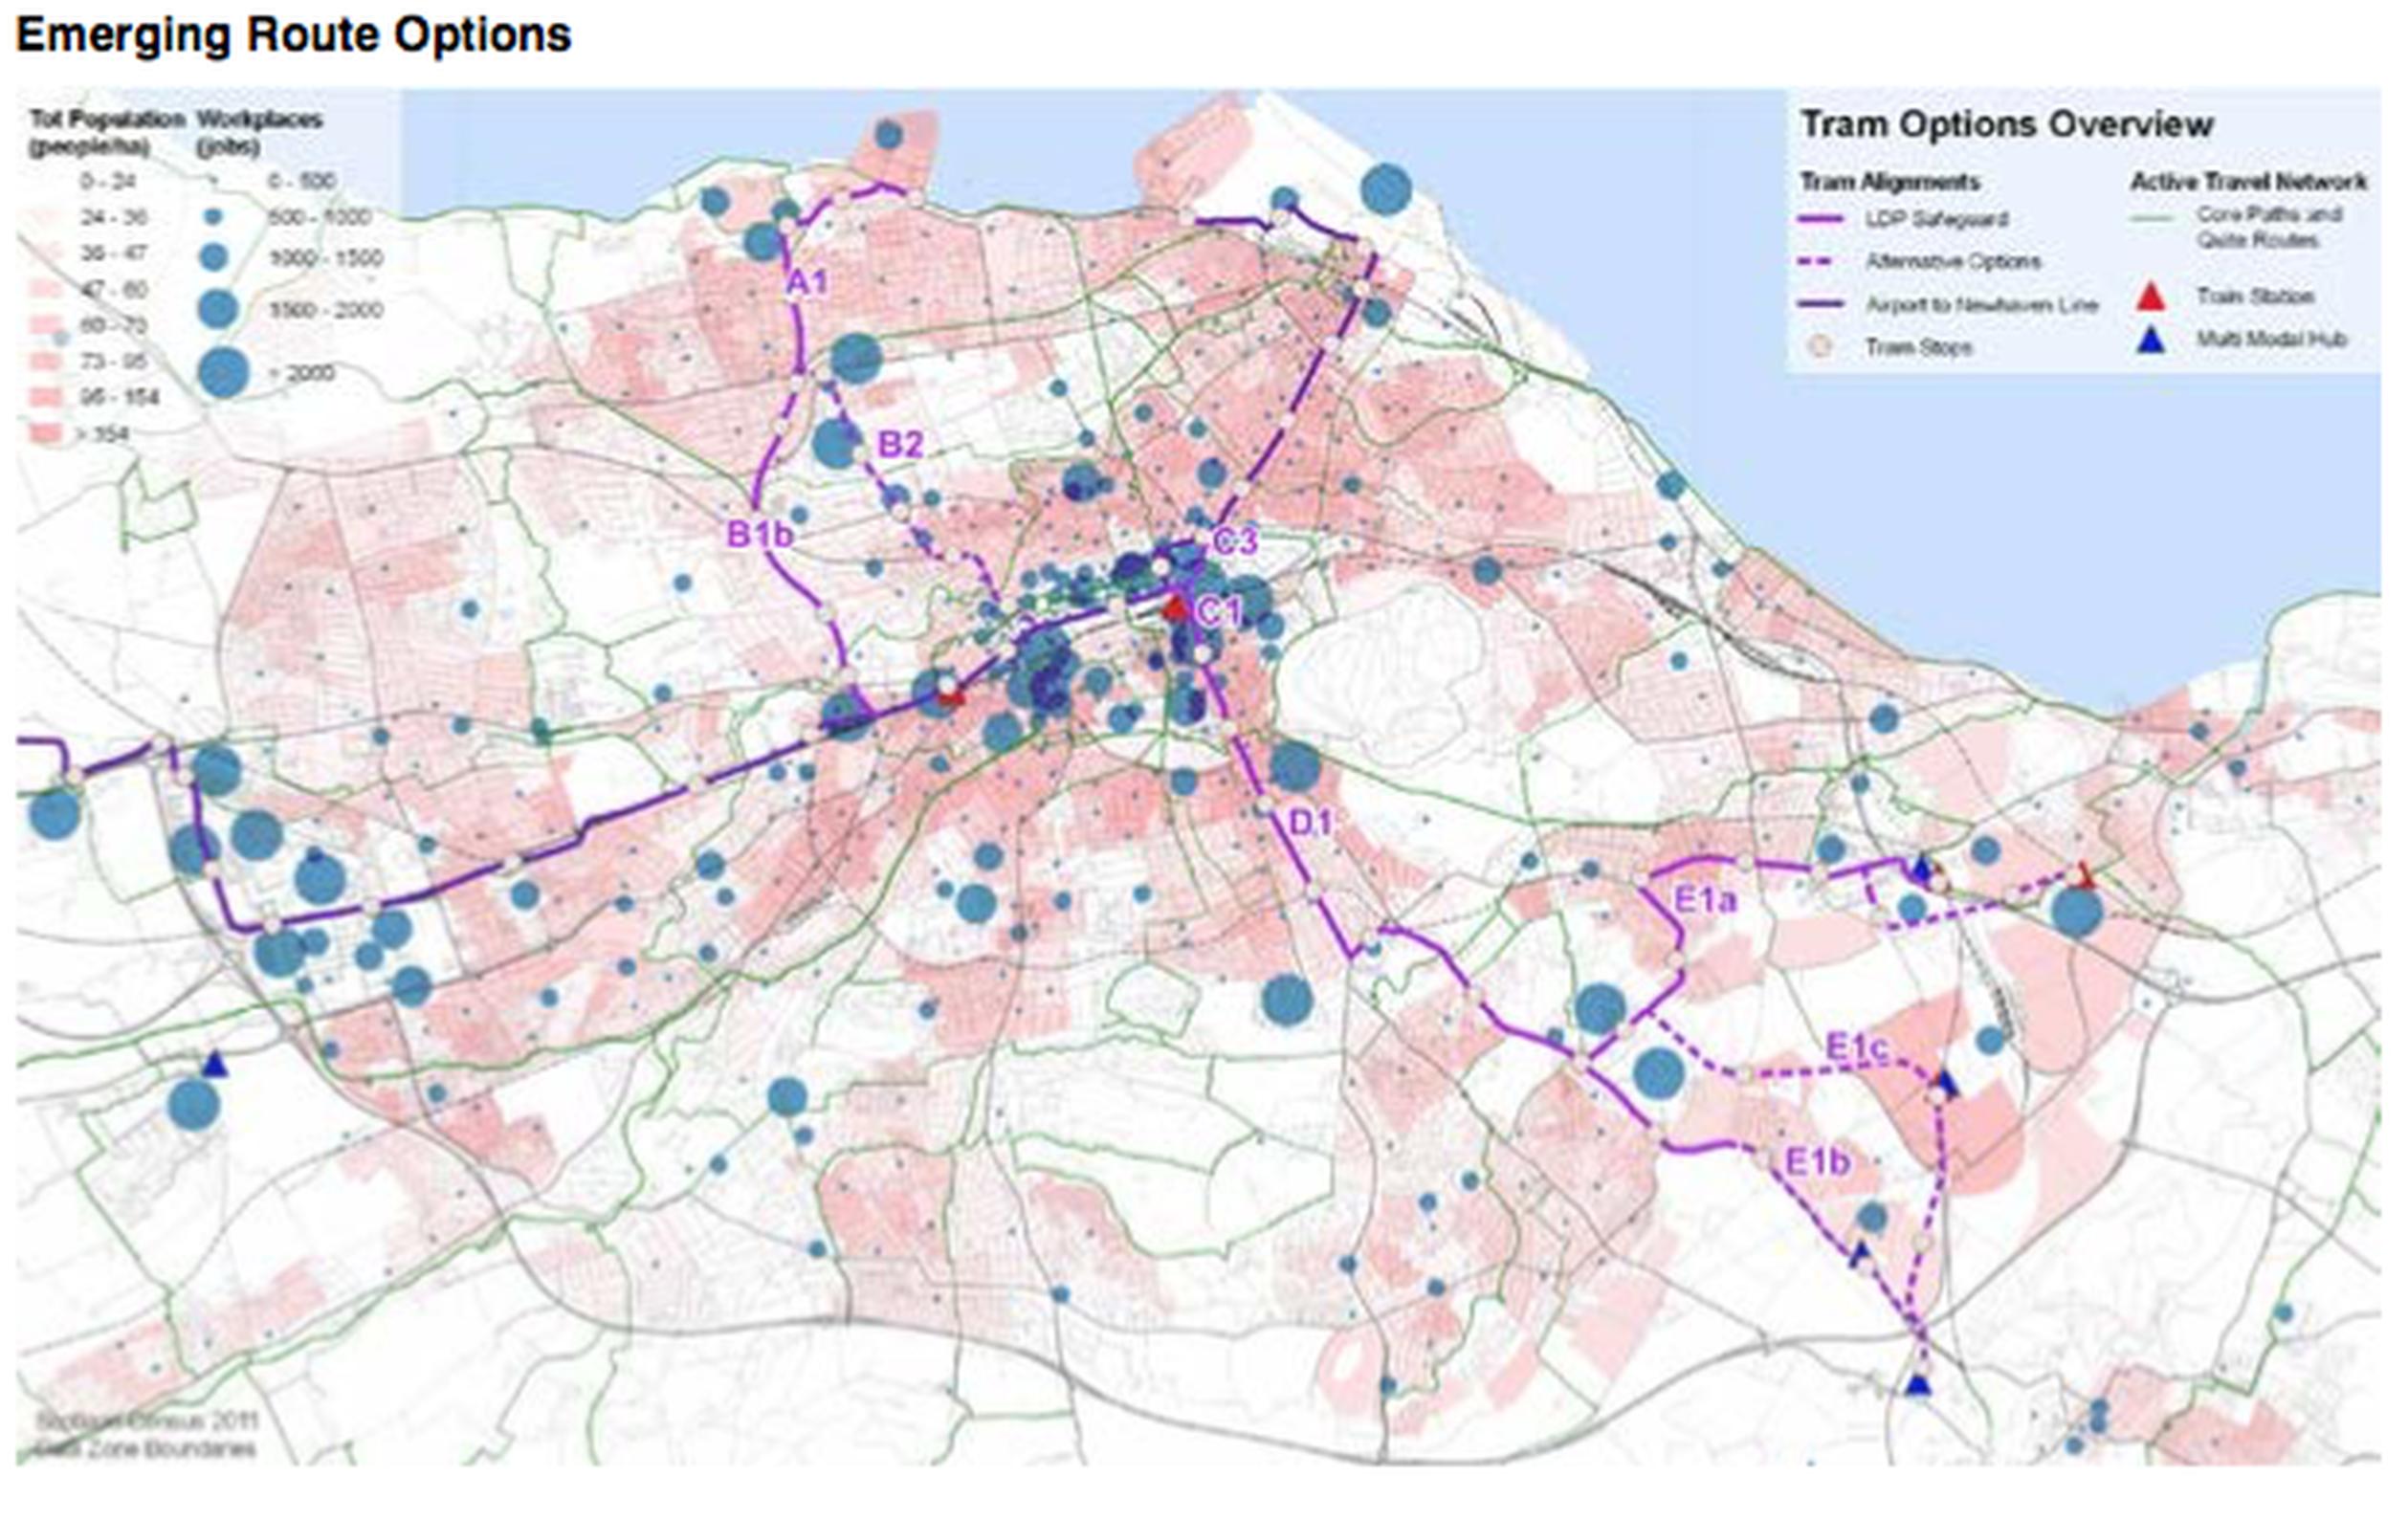 The tram routes under investigation. Source: The City of Edinburgh Council